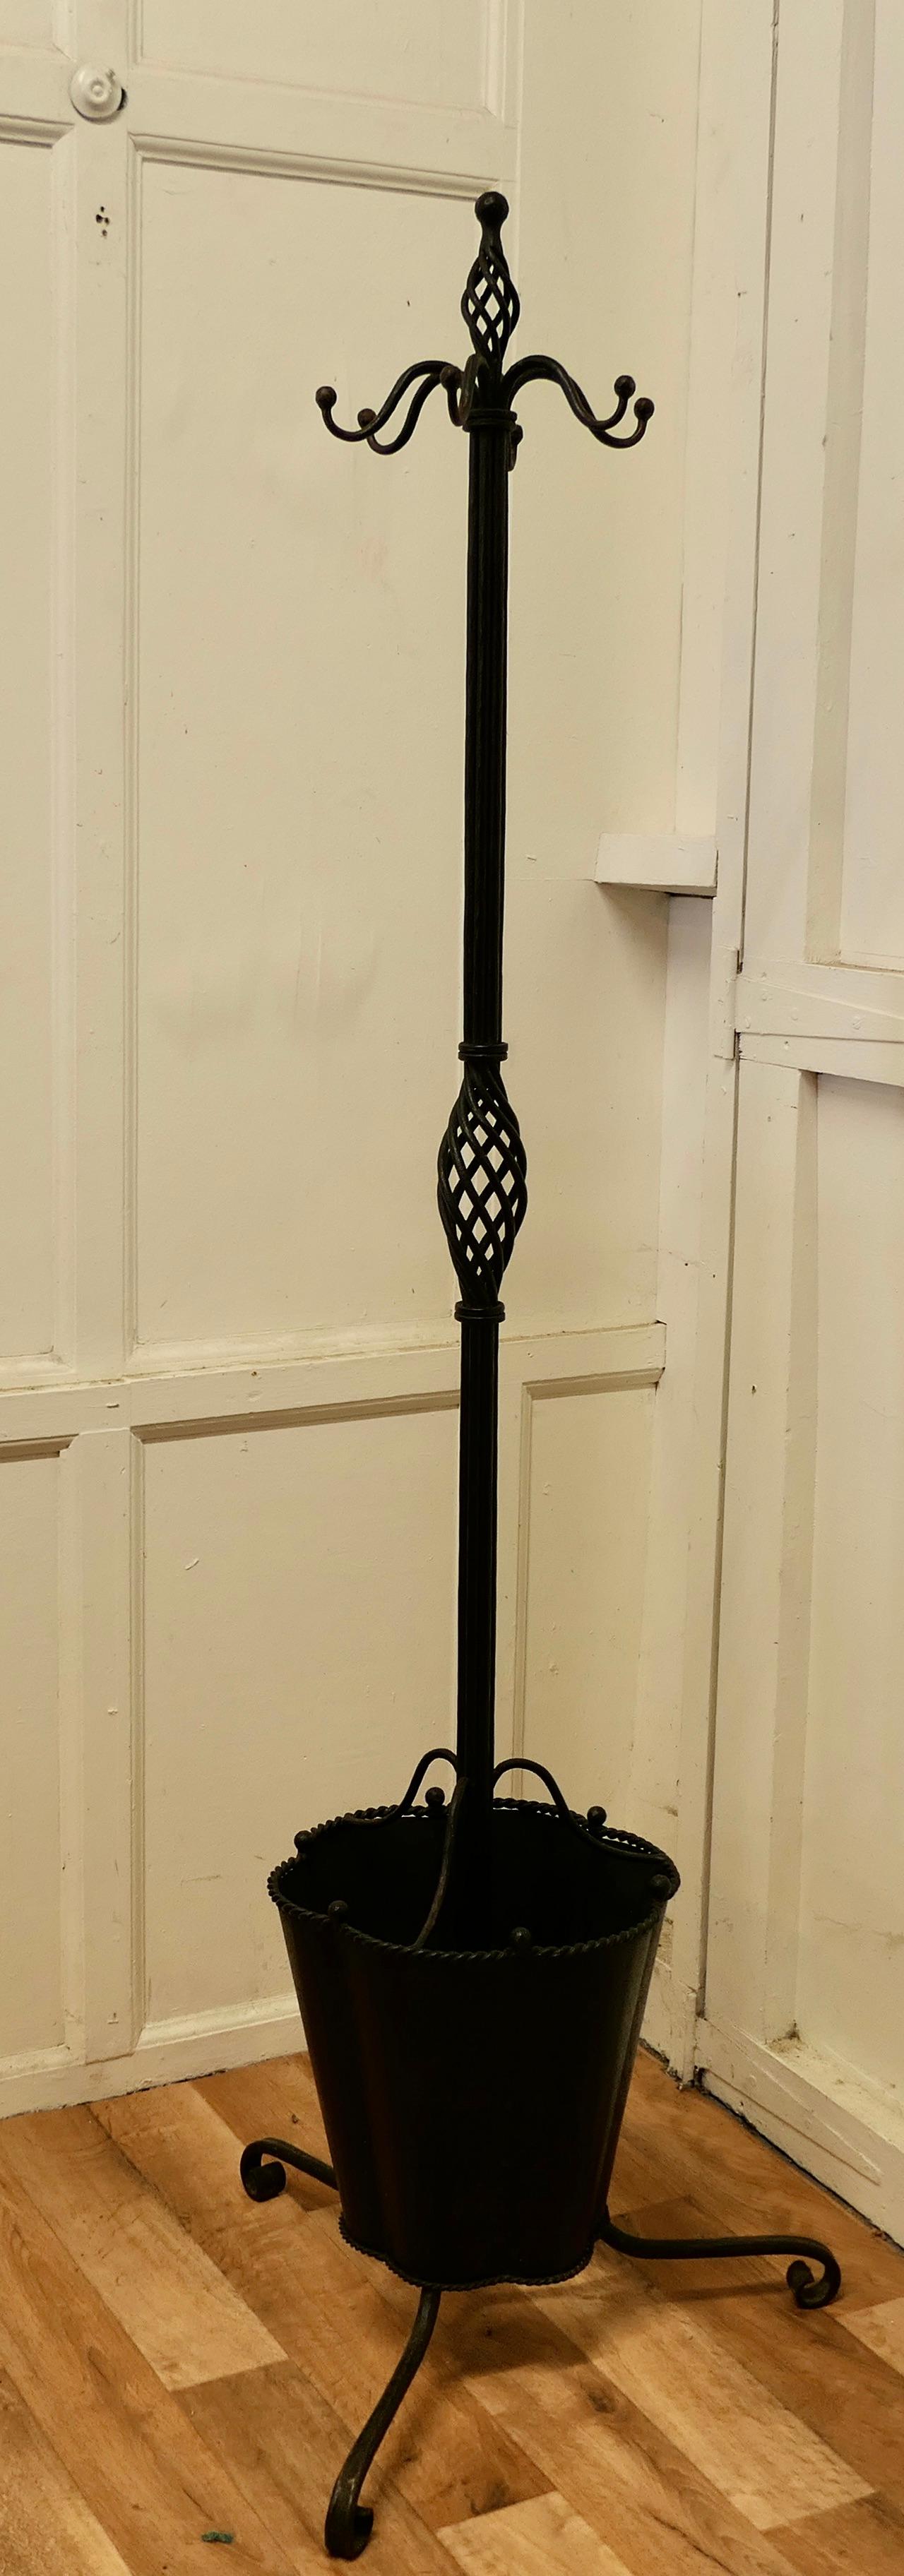 Quirky retro wrought iron hall stand, hats coats and umbrellas 

This is an Unusual Hat & Coat Hall Stand it has Large Hat and Coat pegs at the top, and lower down there is a 4 section holder for umbrellas, in the shape of a giant Umbrella
The